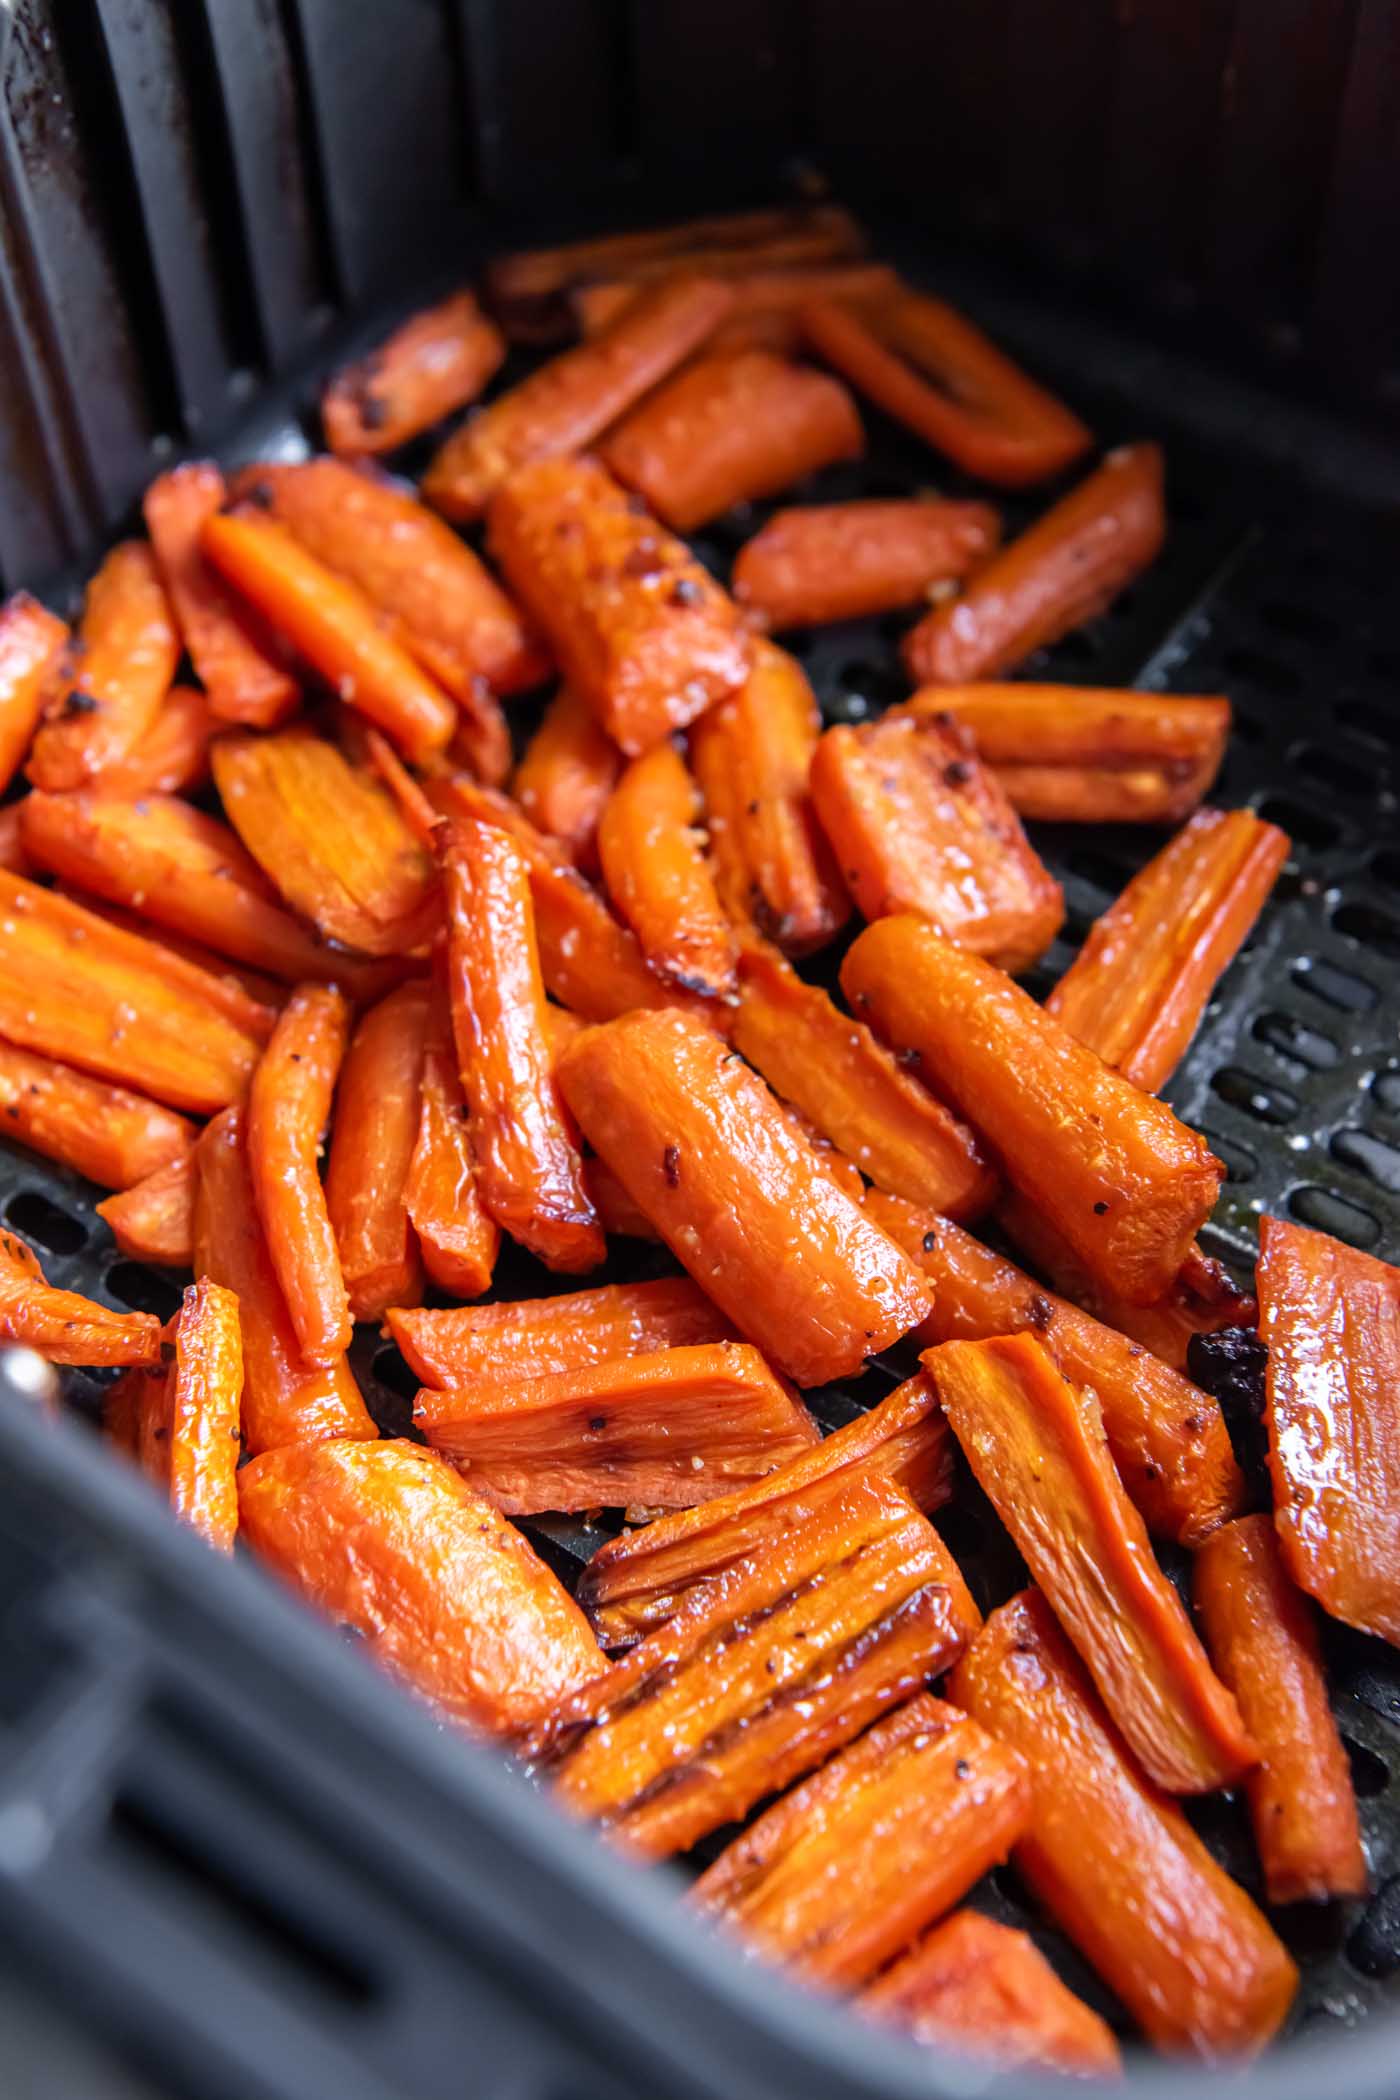 Cooked carrots in air fryer basket.